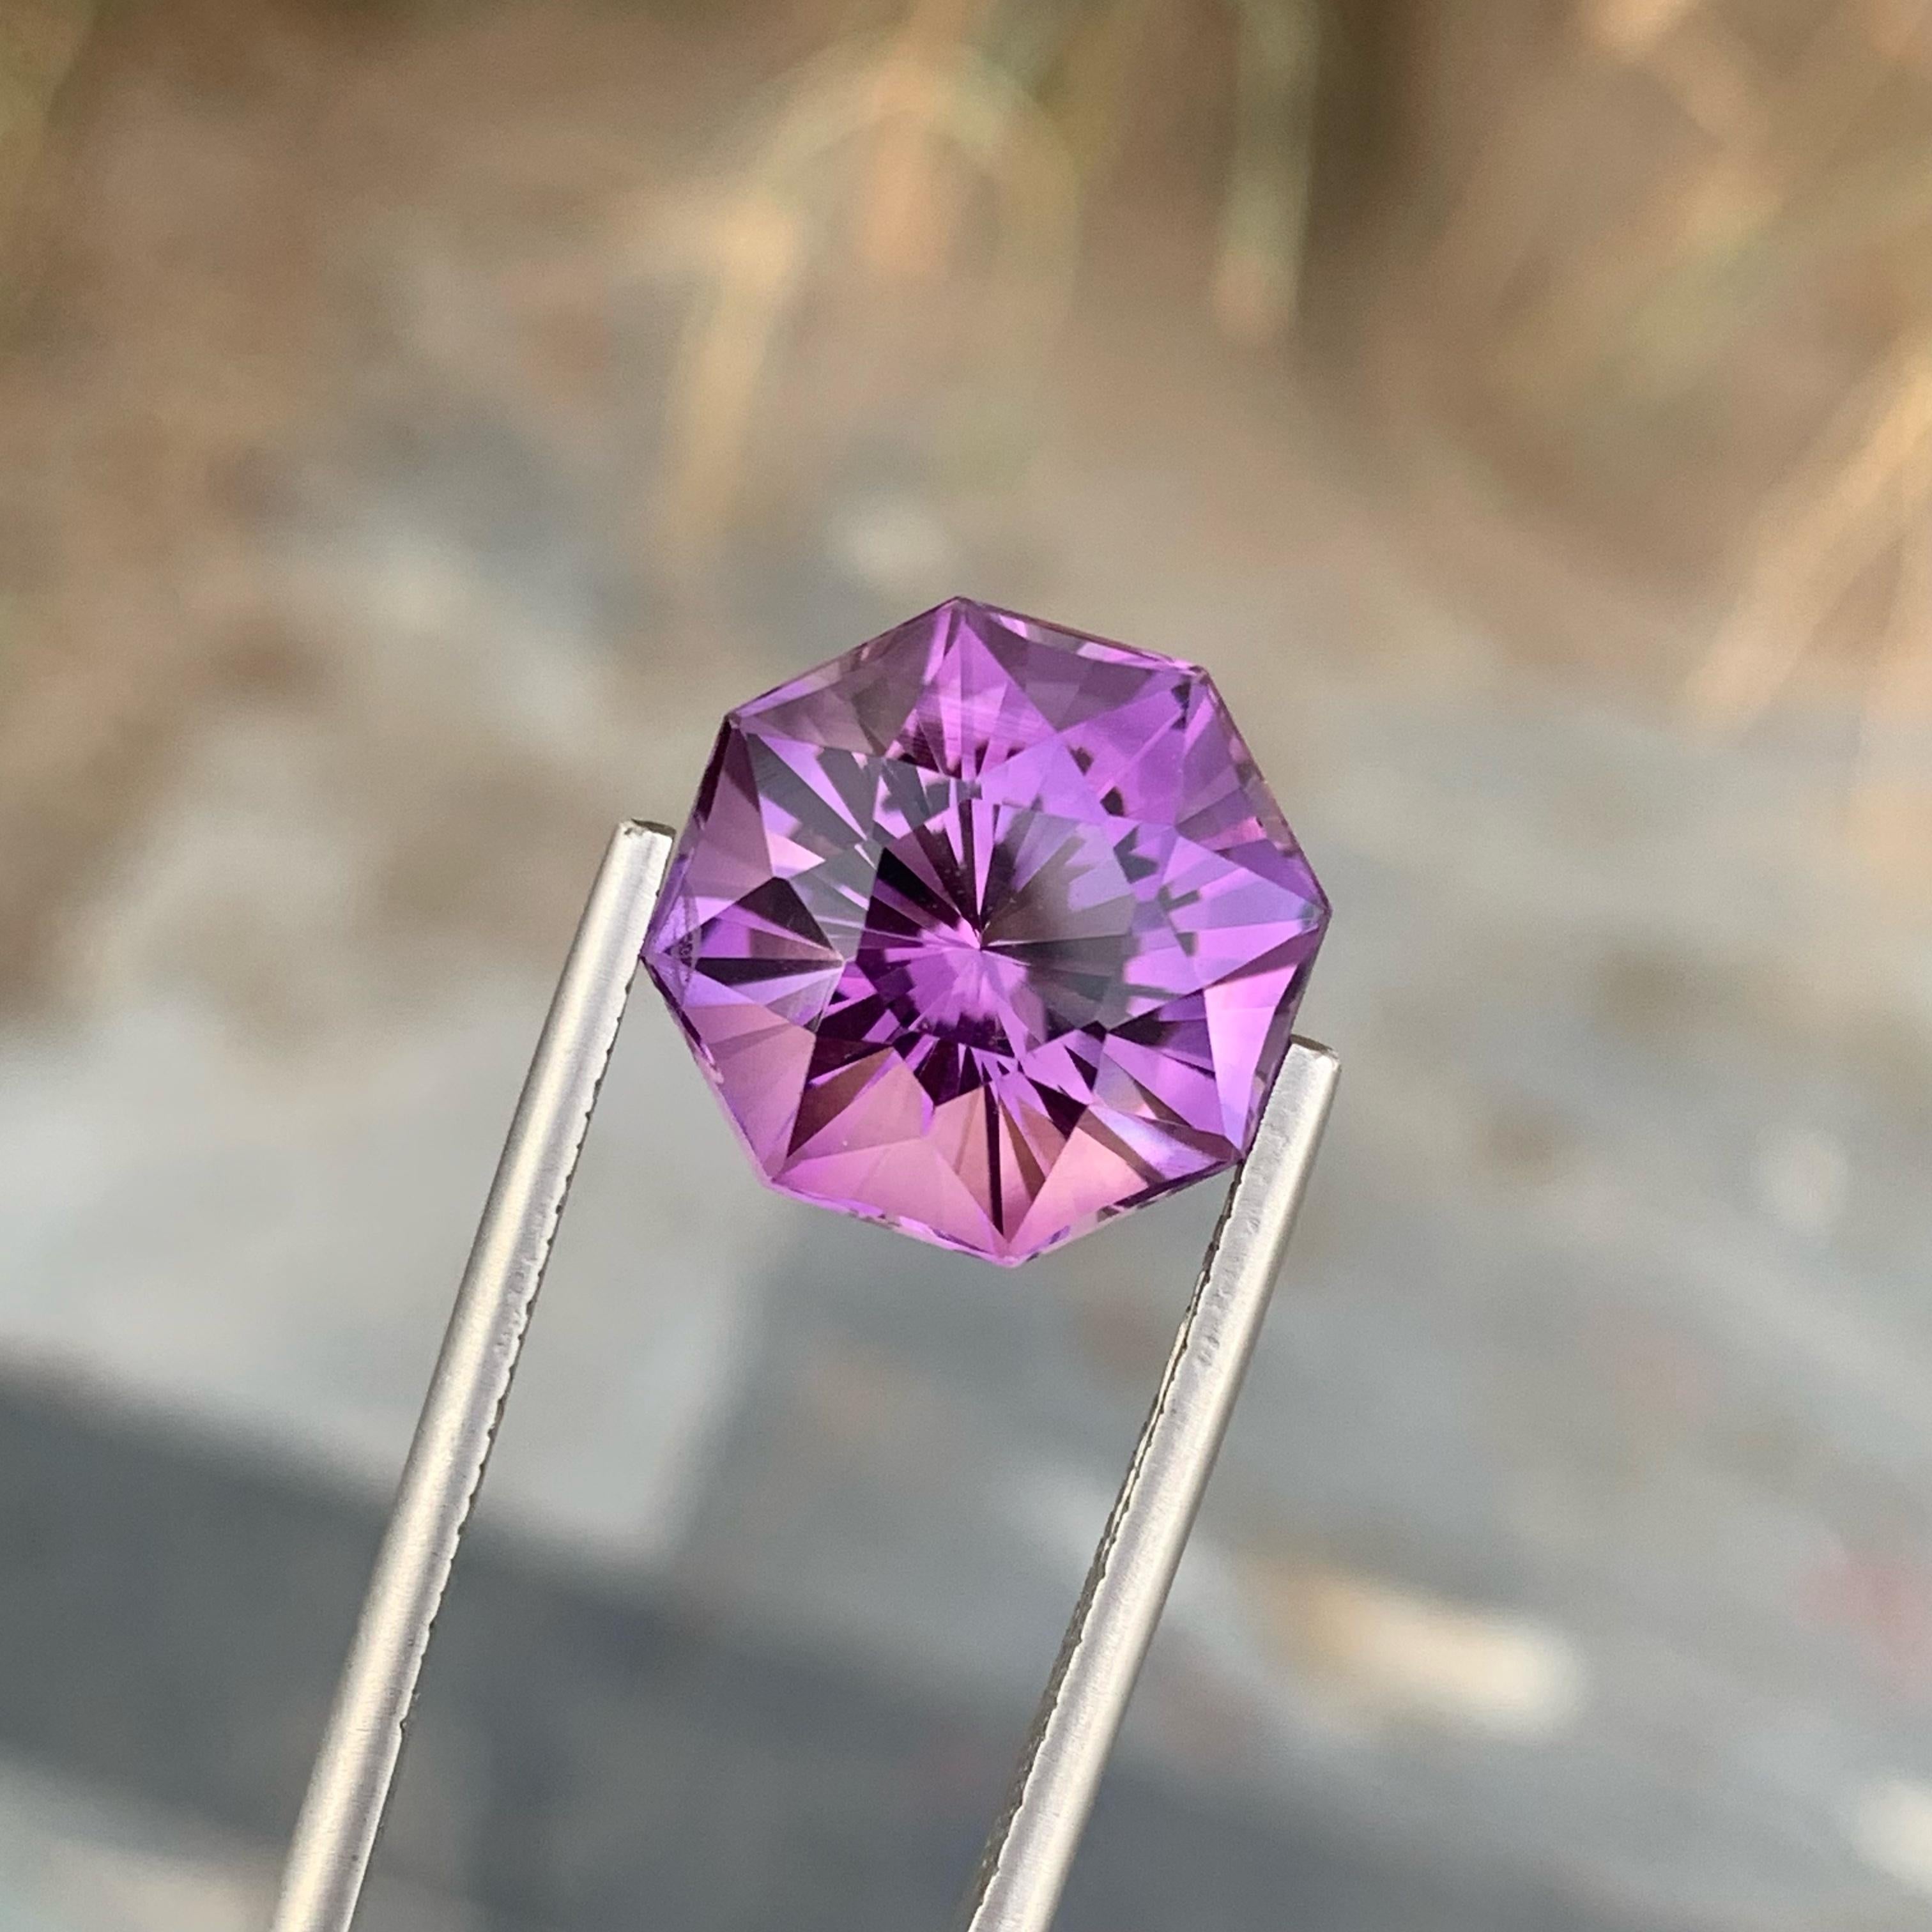 Weight 10.25 carats 
Dimensions 14.2 x 14 x 10.5 mm
Treatment None 
Origin Brazil 
Clarity Eye Clean 
Shape Octagon 
Cut Custom Precision



Elevate your jewelry collection with this exquisite 10.25 carat Amethyst, custom precision cut from a